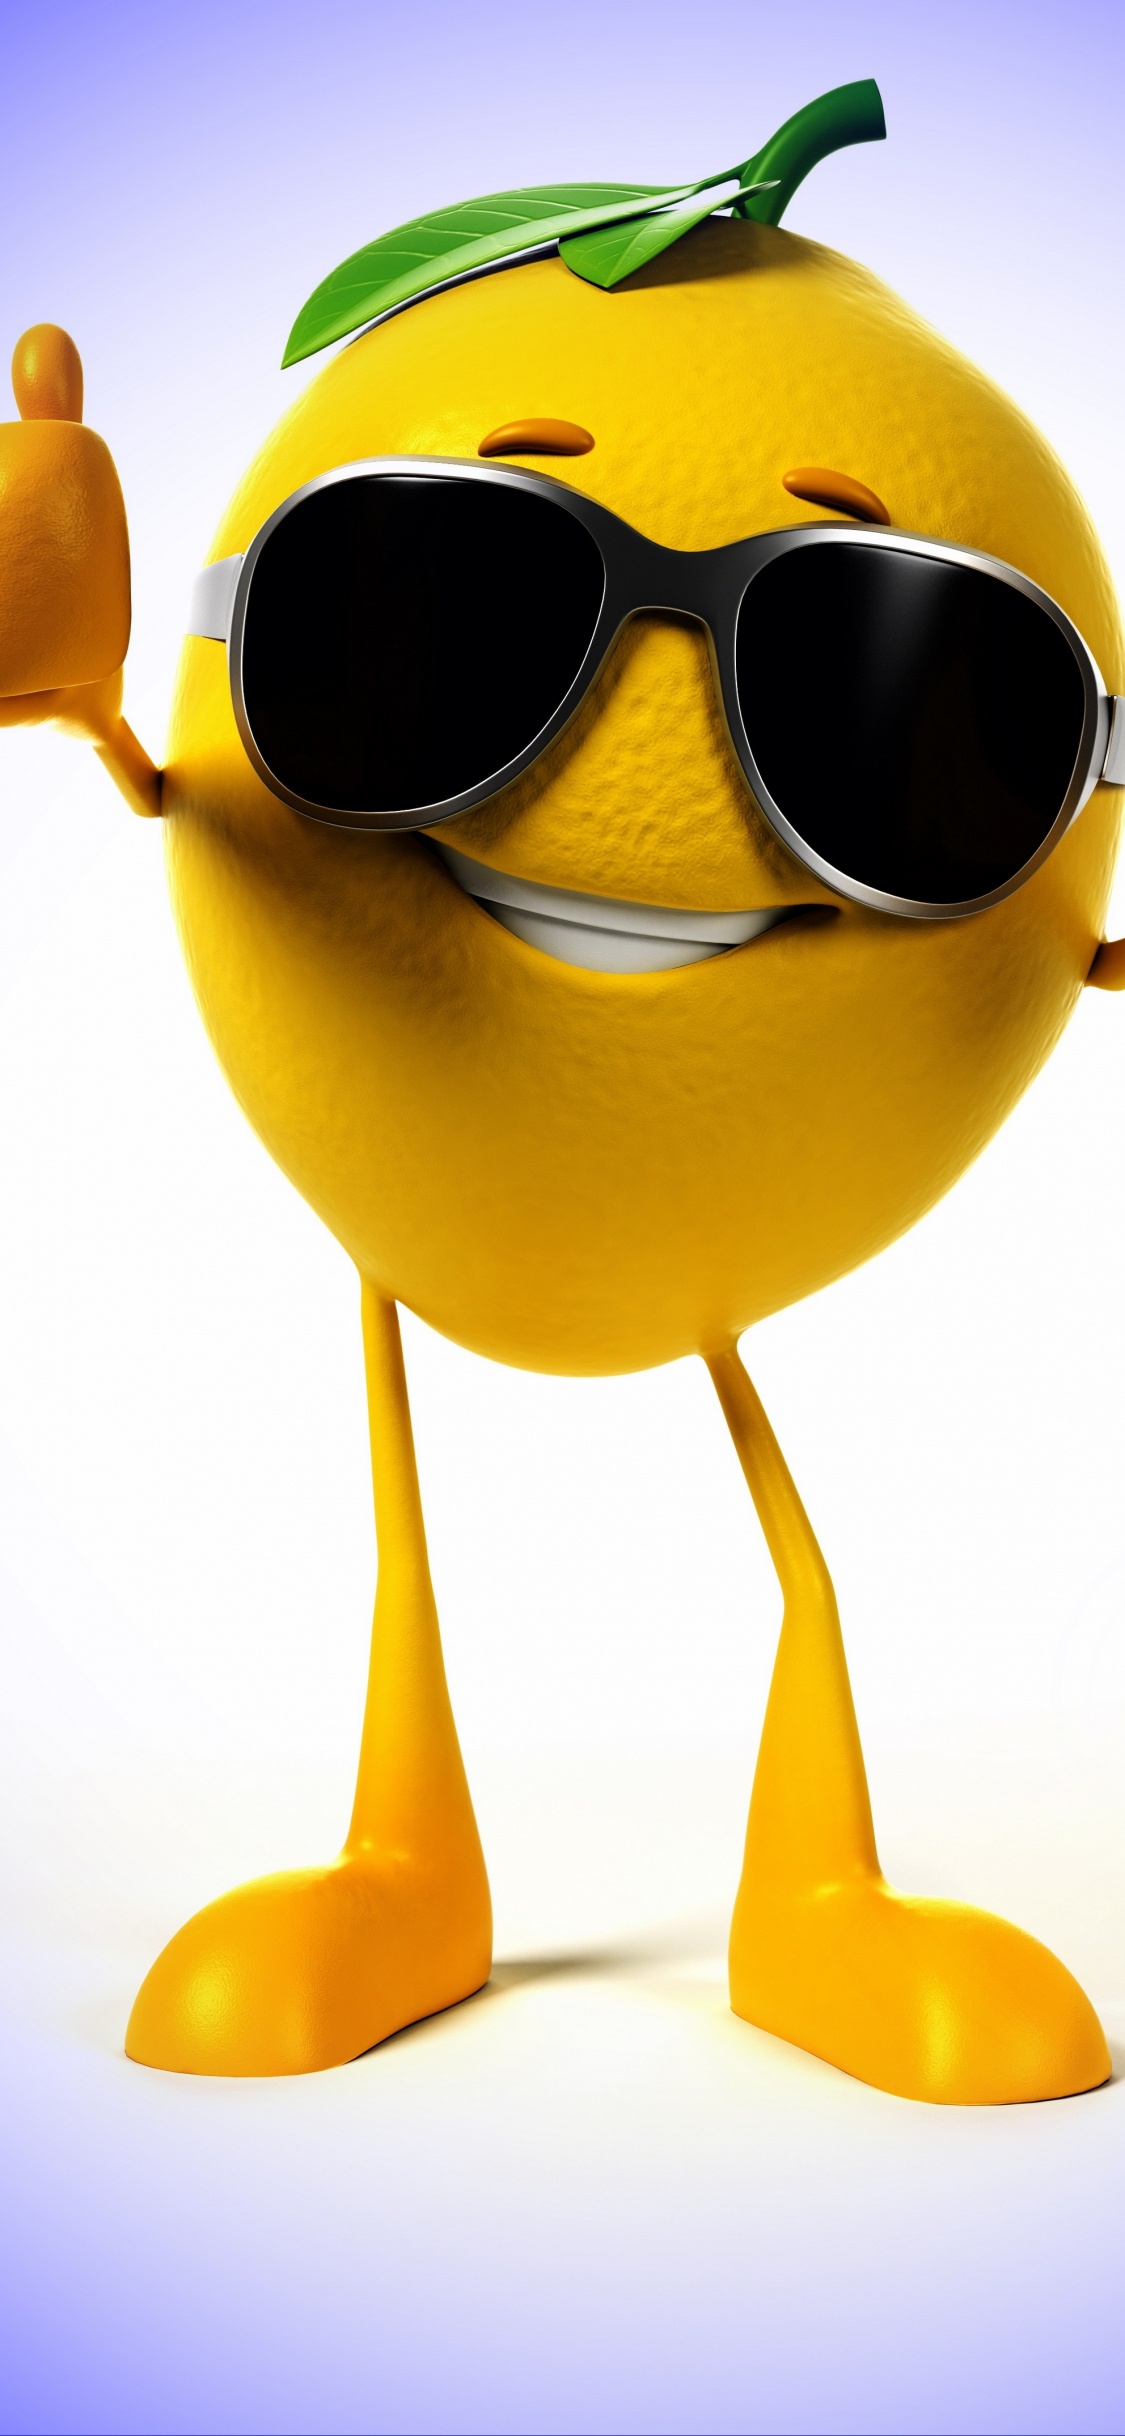 Yellow and Green Frog Wearing Sunglasses. Wallpaper in 1125x2436 Resolution